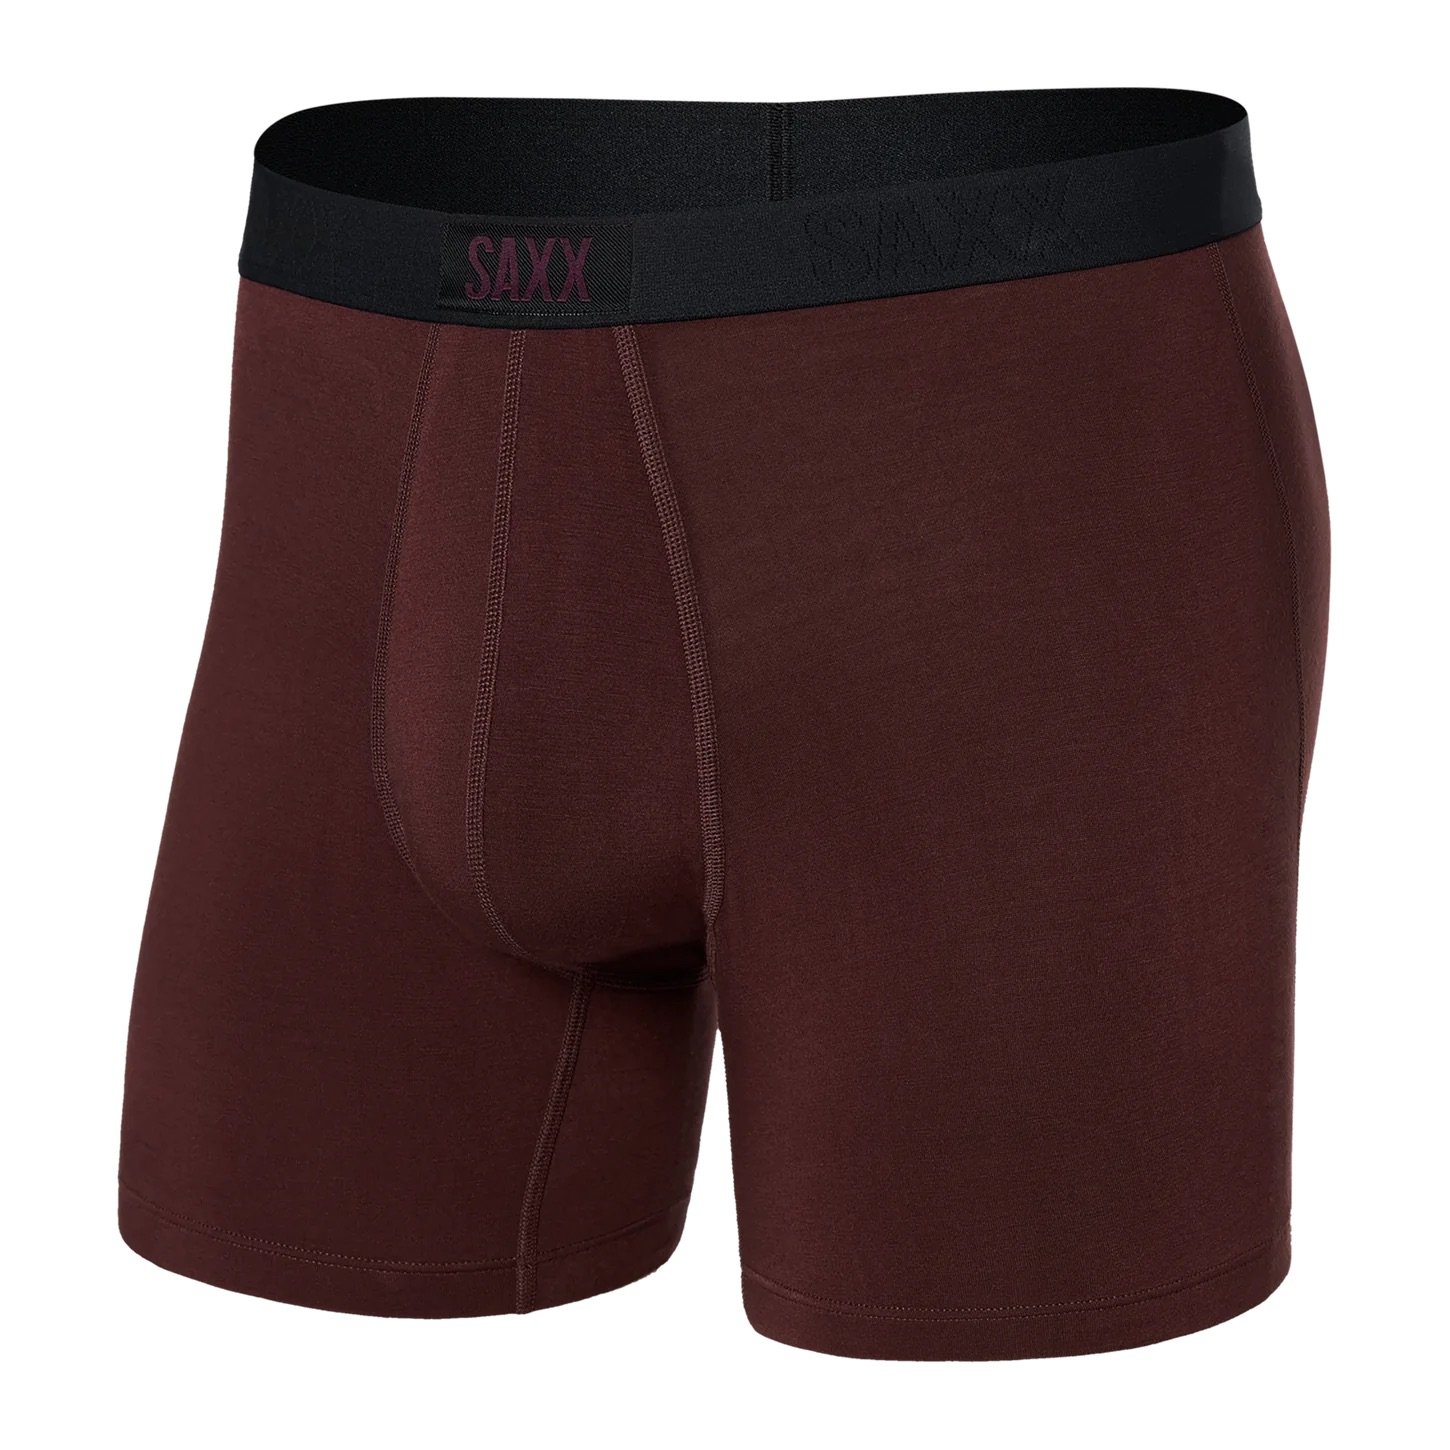 Vibe Boxer Brief Action Spacedye Teal